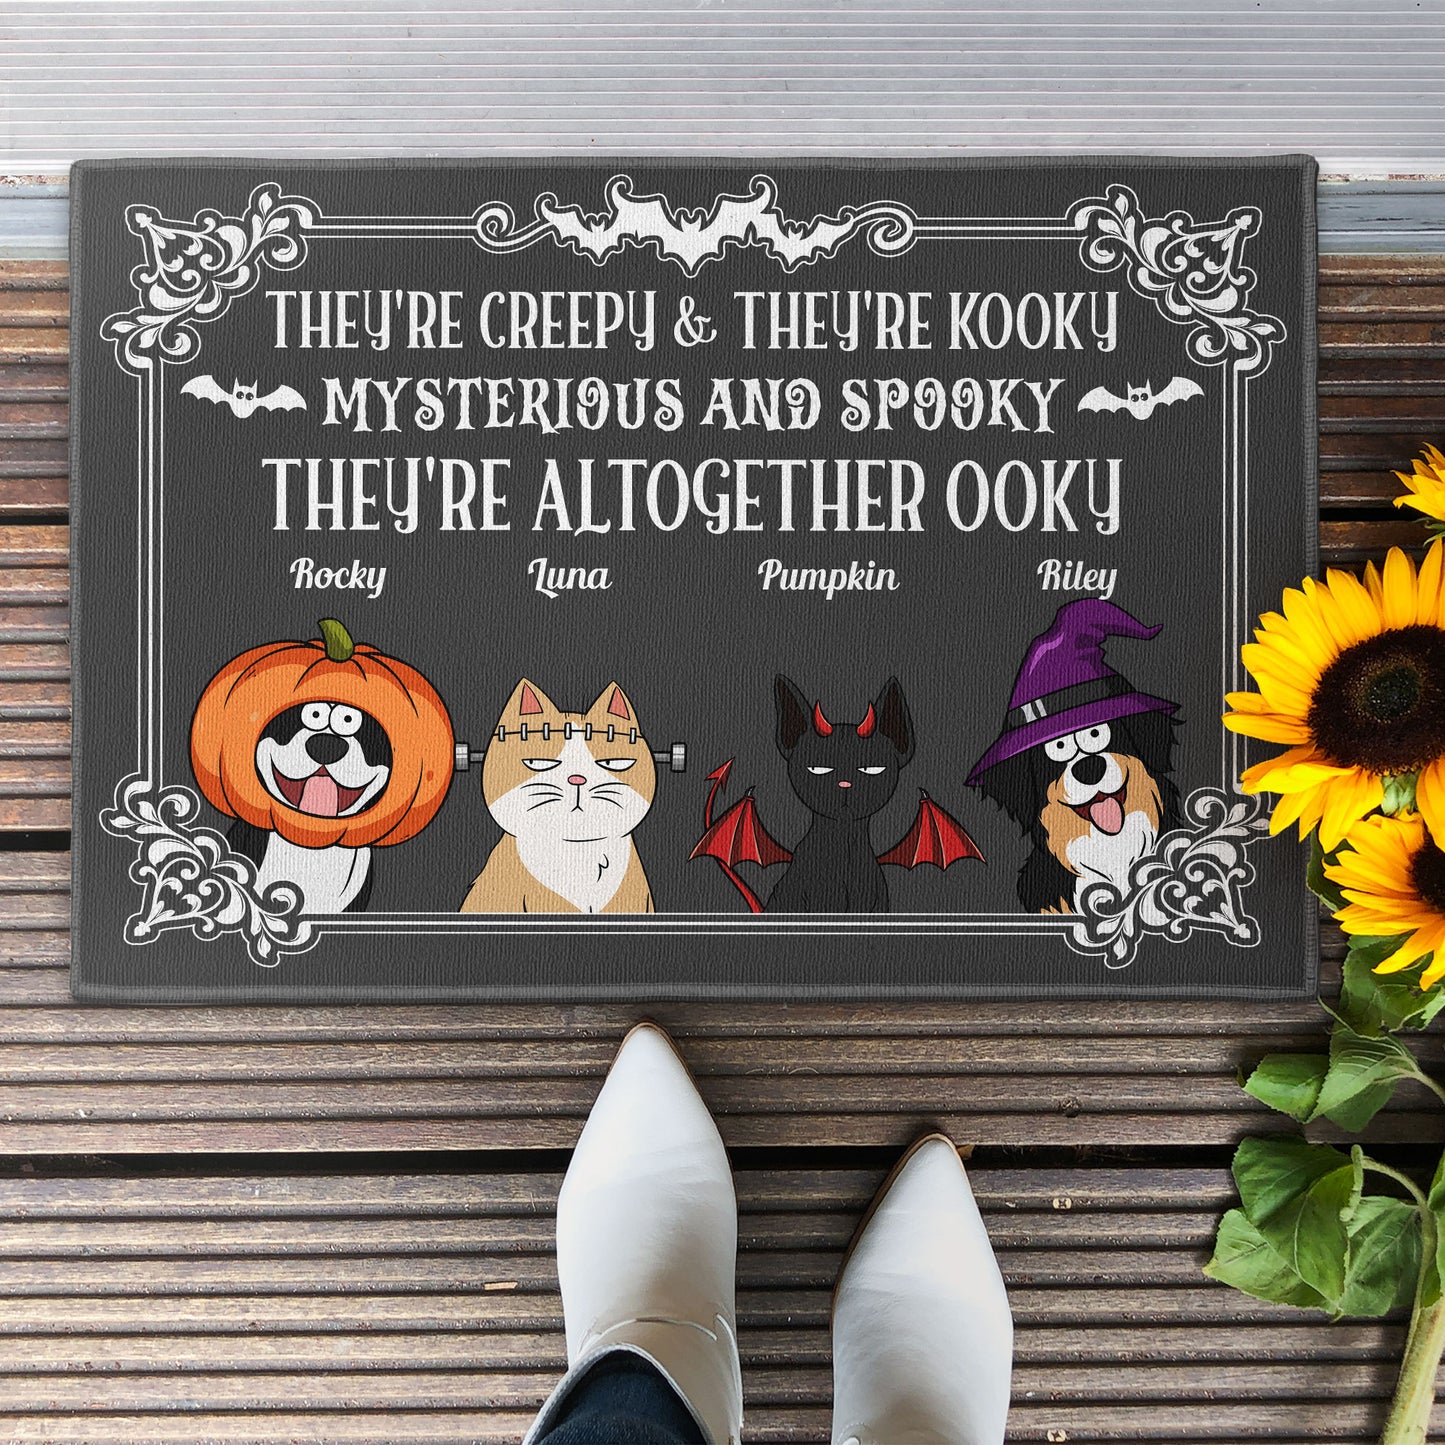 They're Altogether Ooky - Personalized Doormat